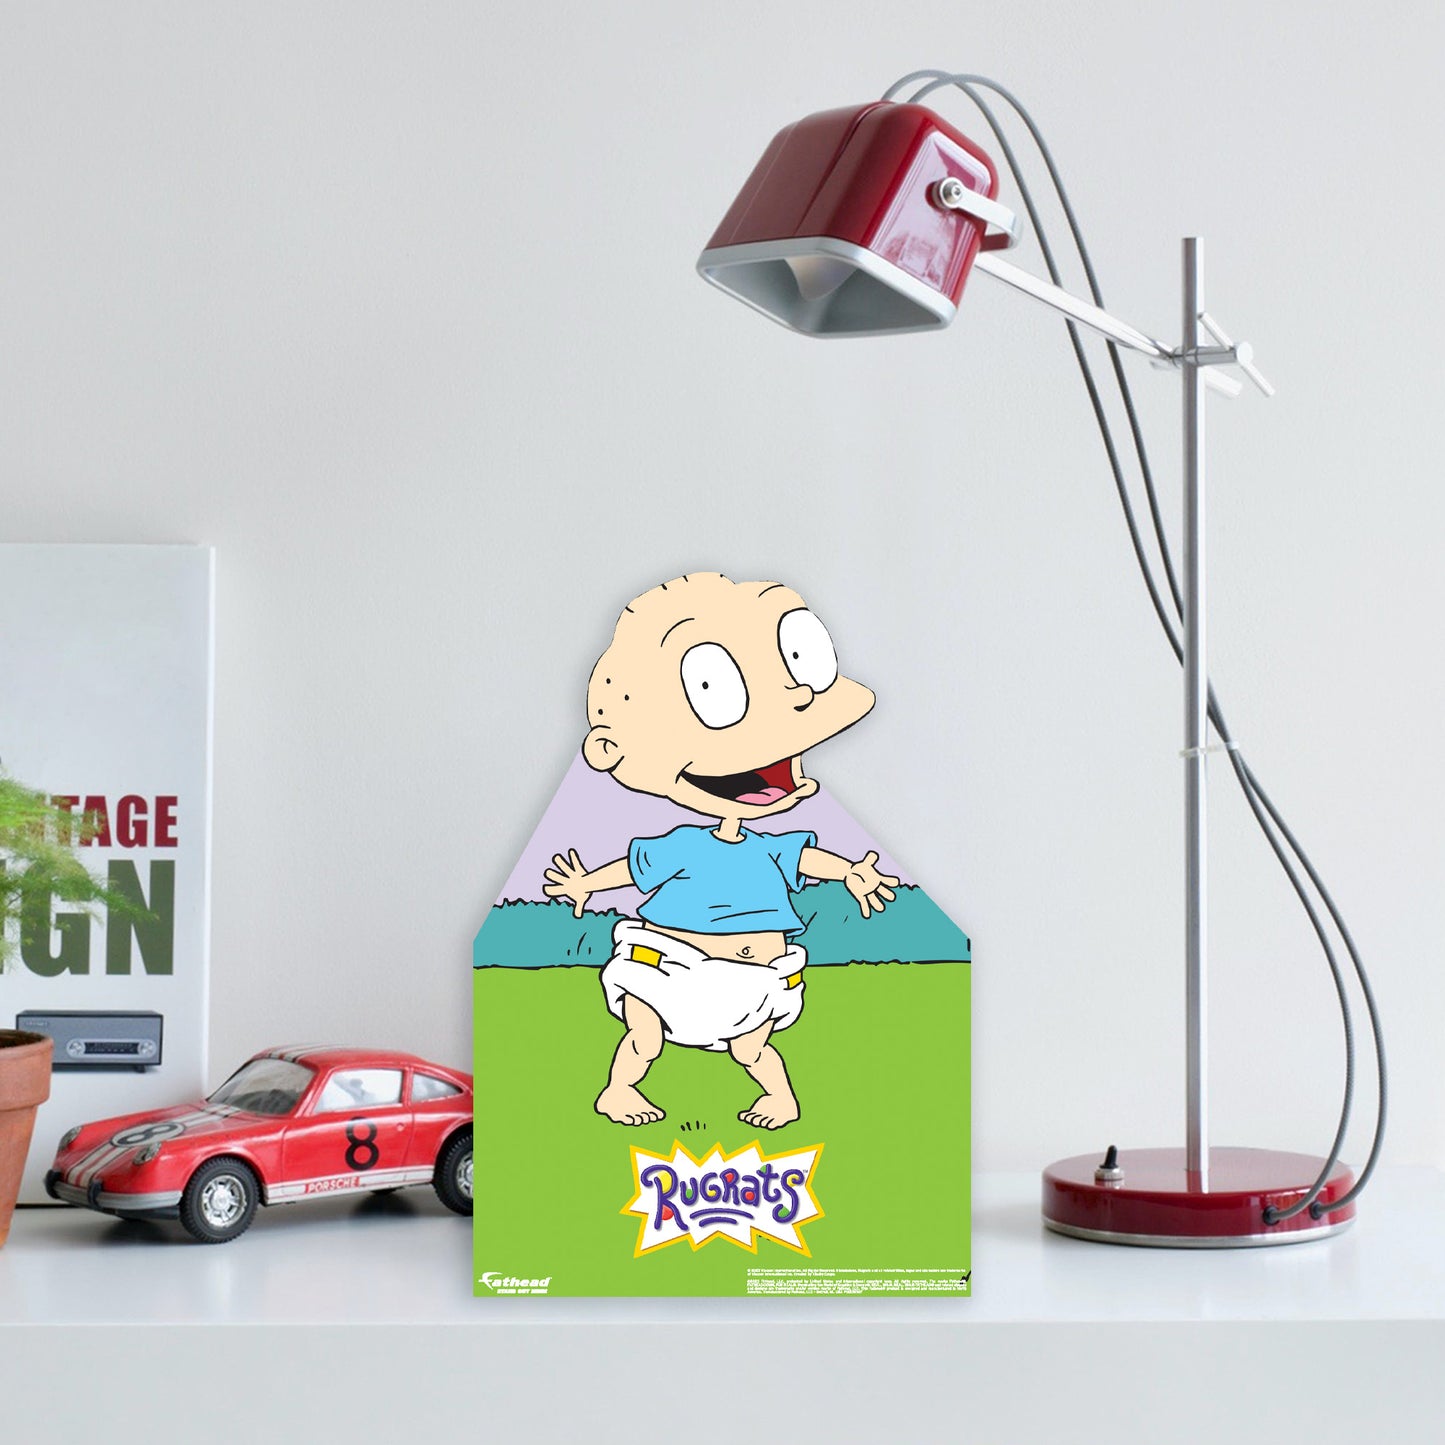 Rugrats: Tommy Pickles Mini   Cardstock Cutout  - Officially Licensed Nickelodeon    Stand Out